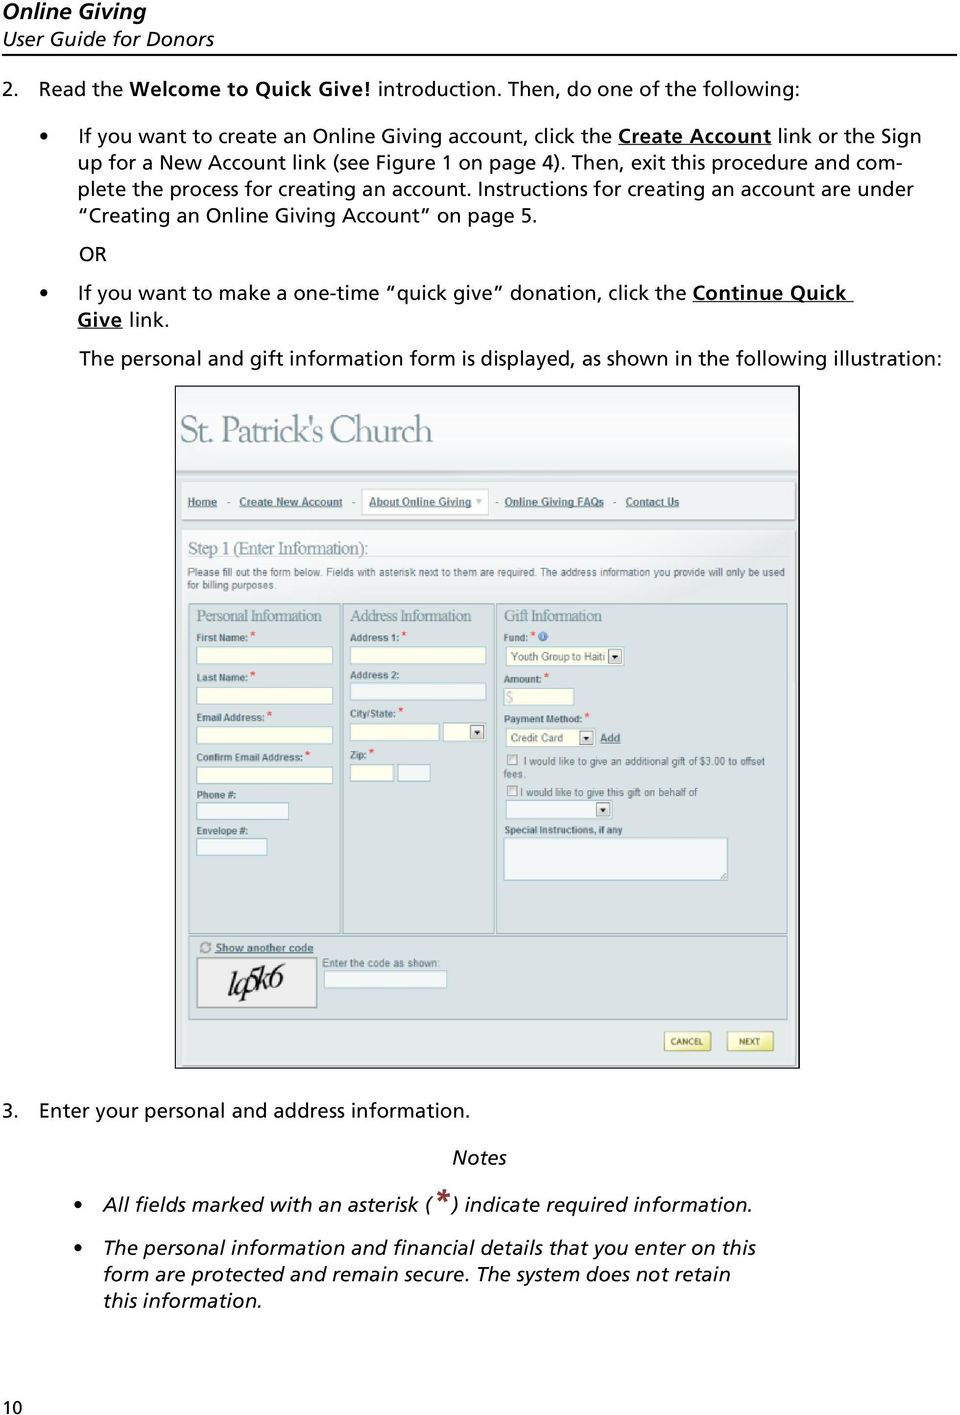 Then, exit this procedure and complete the process for creating an account. Instructions for creating an account are under Creating an Online Giving Account on page 5.